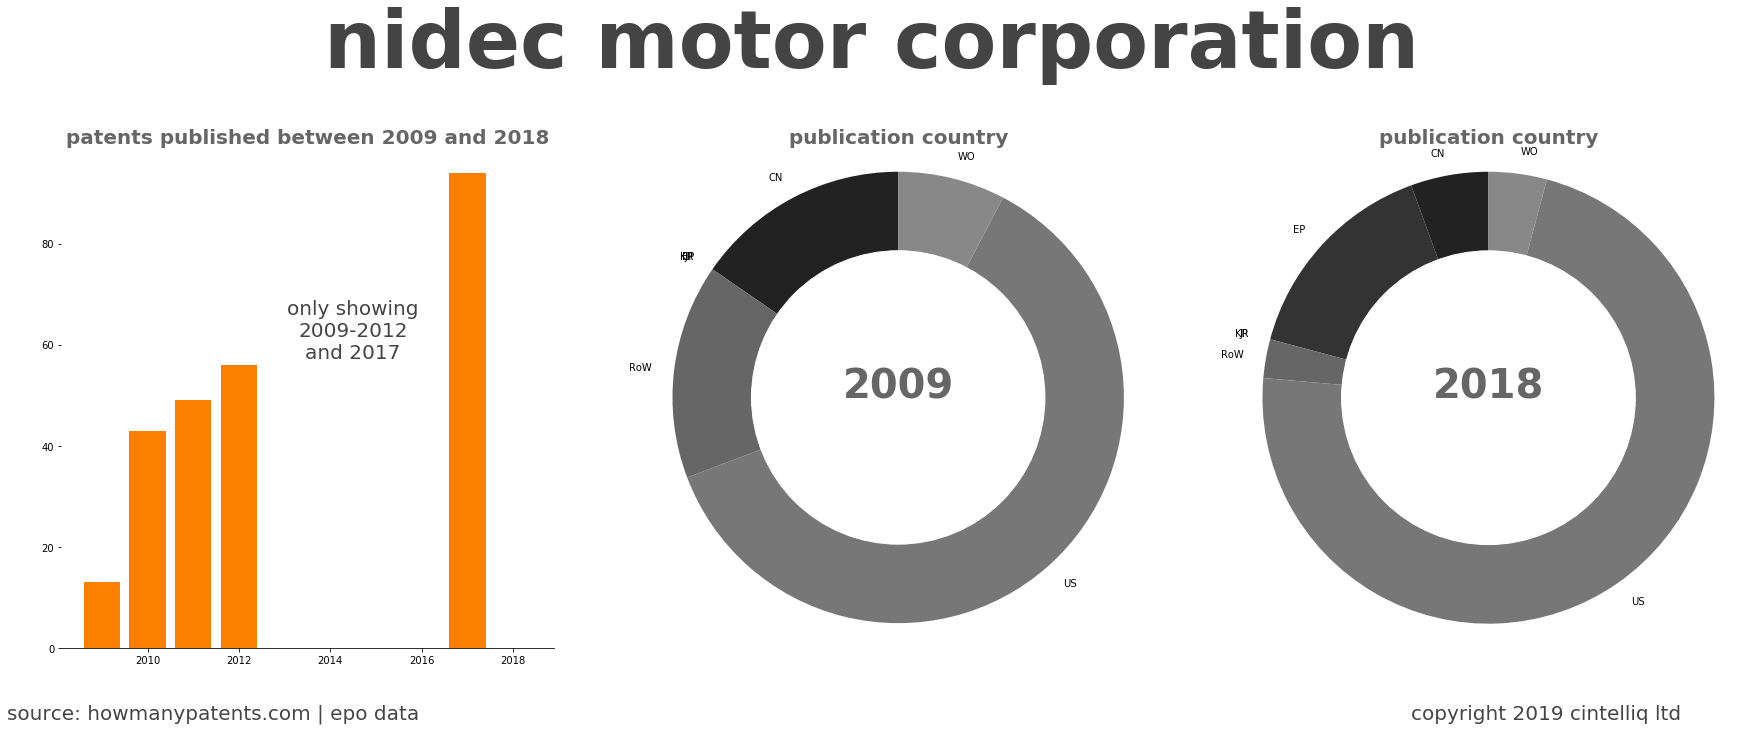 summary of patents for Nidec Motor Corporation